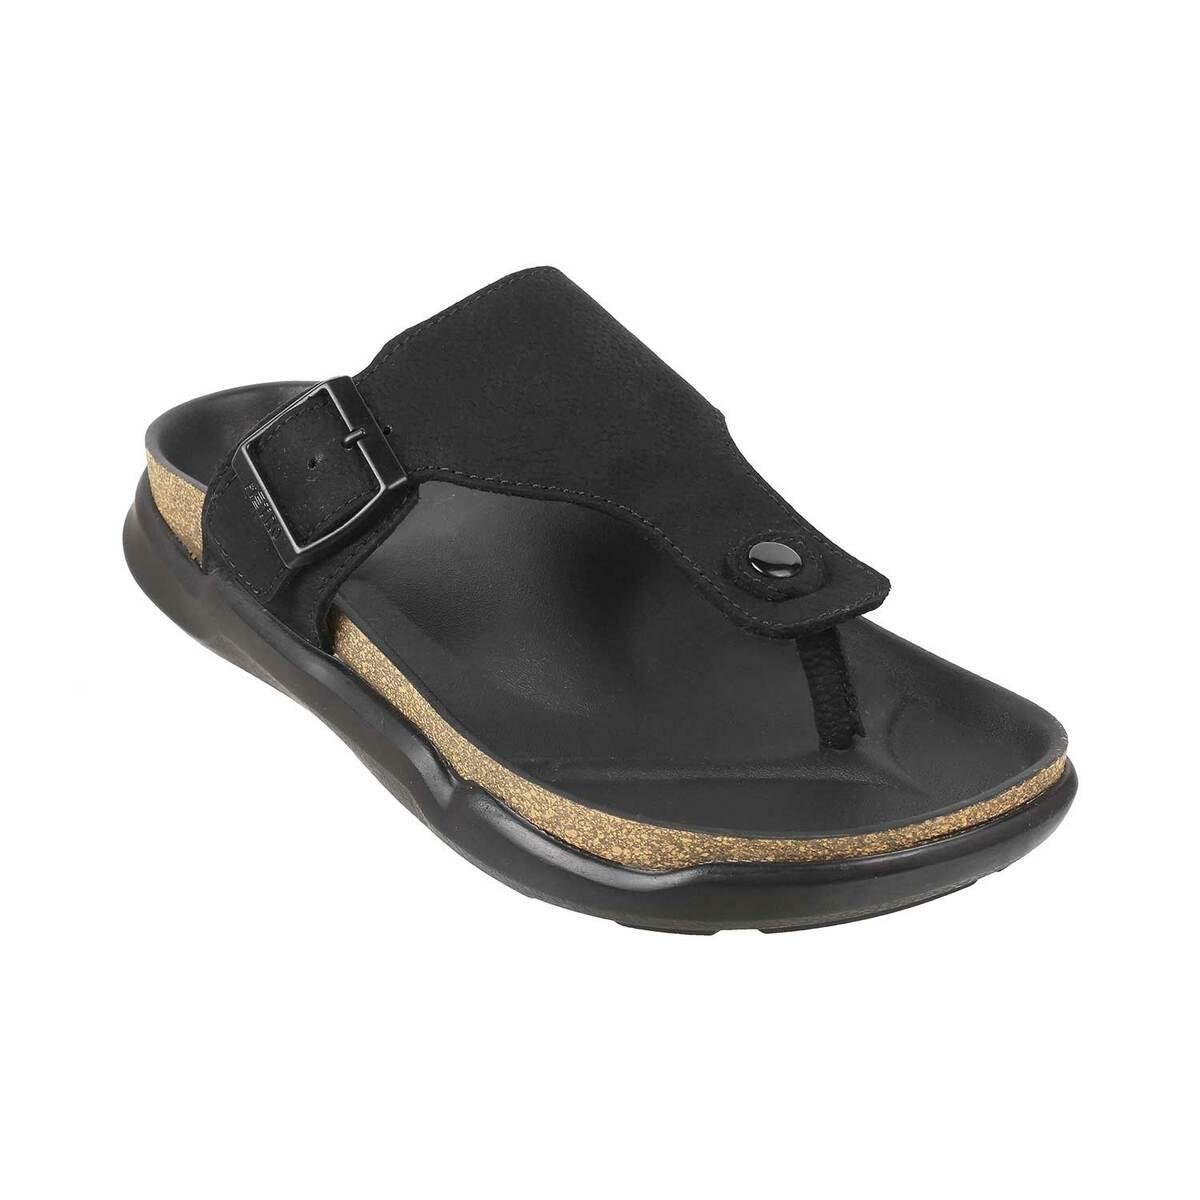 Buy Metro Women's Black T-Strap Sandals from top Brands at Best Prices  Online in India | Tata CLiQ